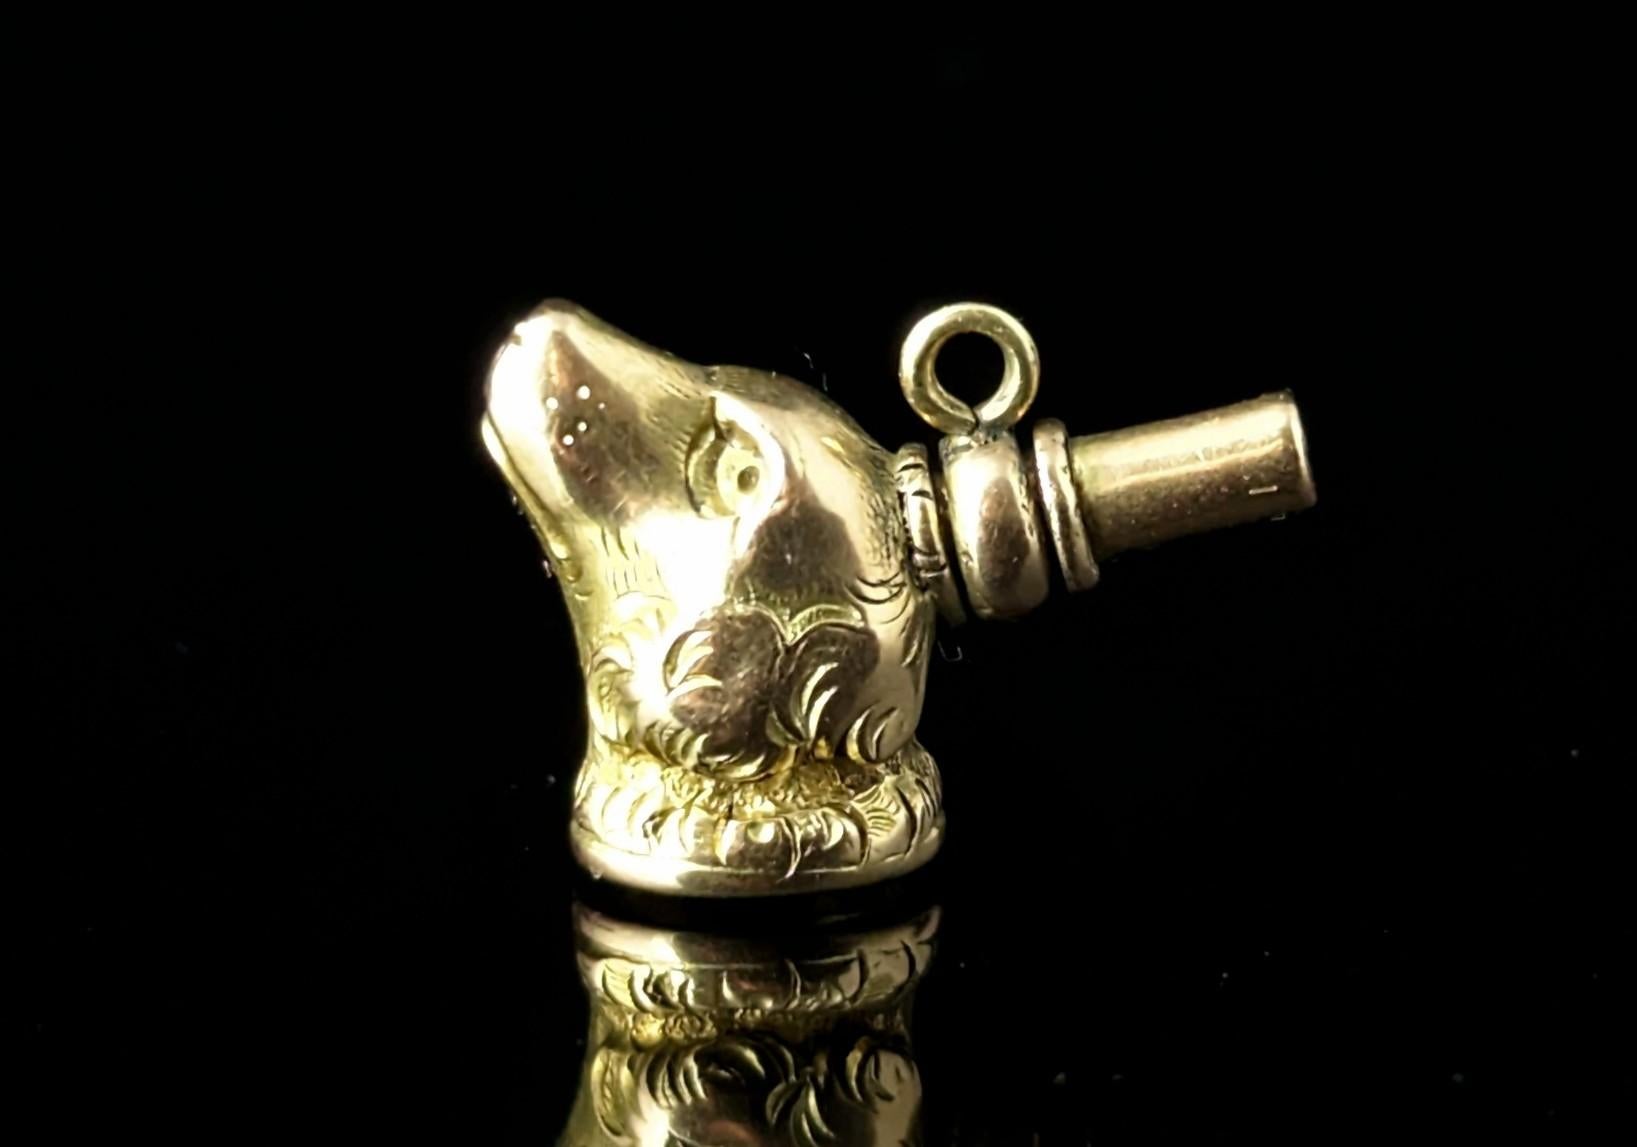 They say good things come in small packages and that is certainly the case with this magnificent piece.

This is an early Victorian watch key and fob in 9ct gold, not just any old key though this is designed as the head of a dog.

This charming